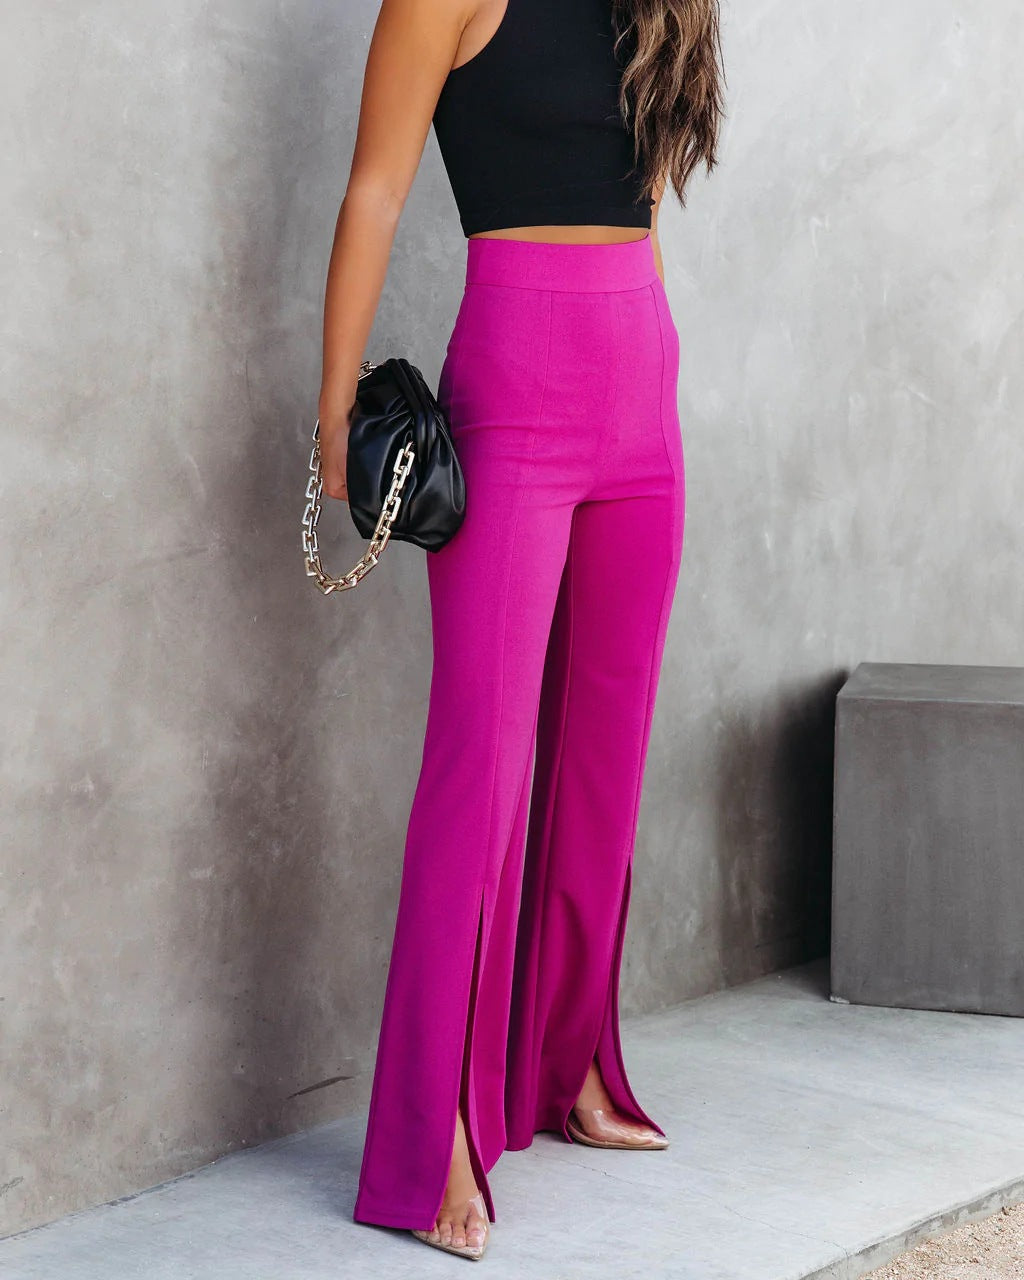 Hot Pink Pants Outfit  High Waist Hot Pink Aesthetic Slit Pants